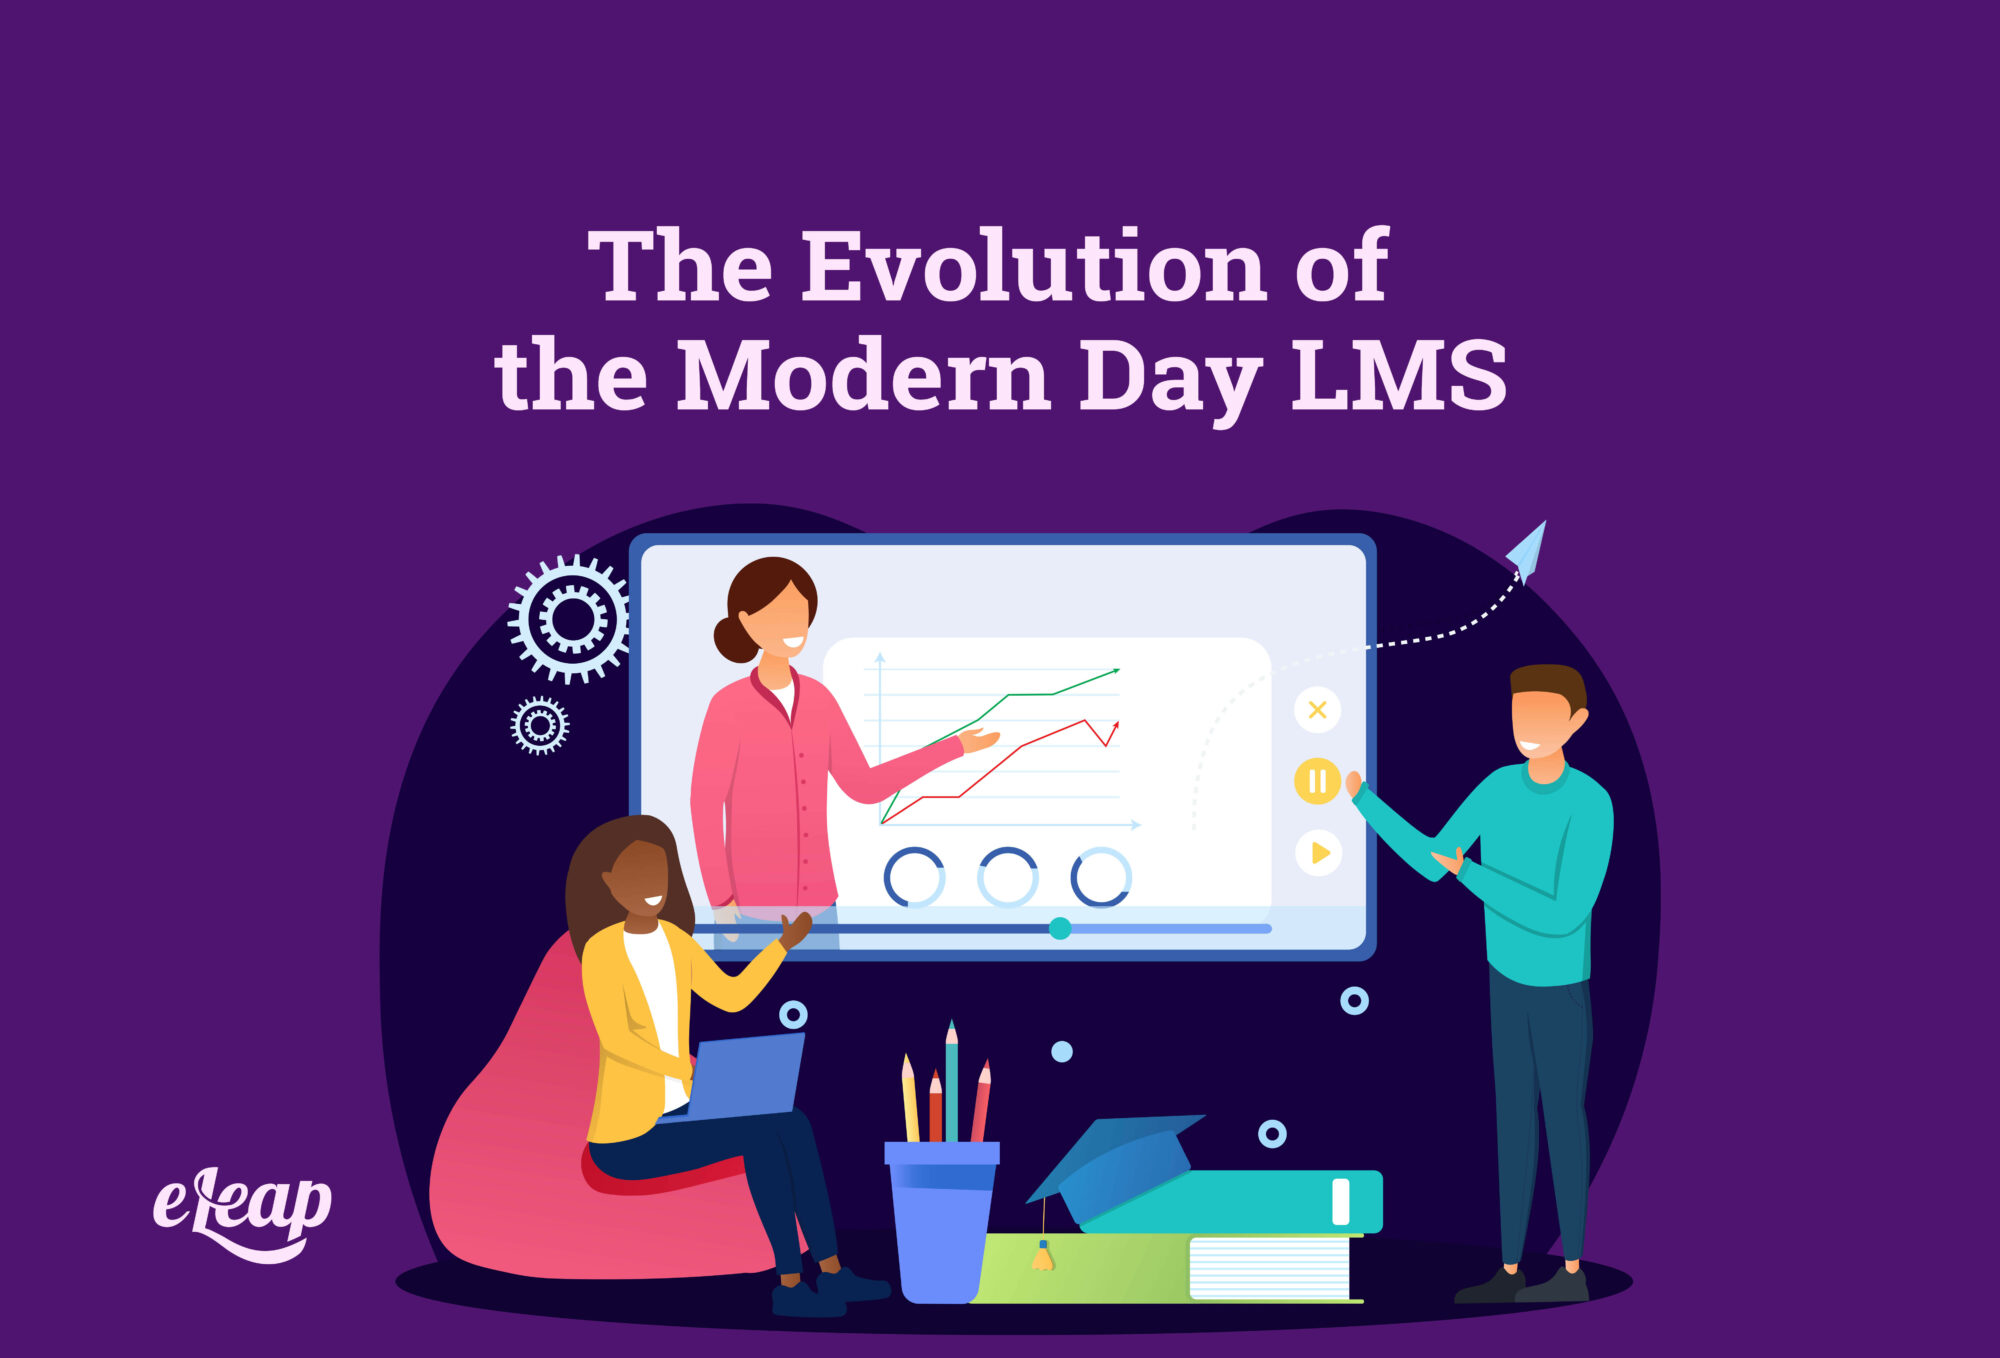 The Evolution of the Modern Day LMS